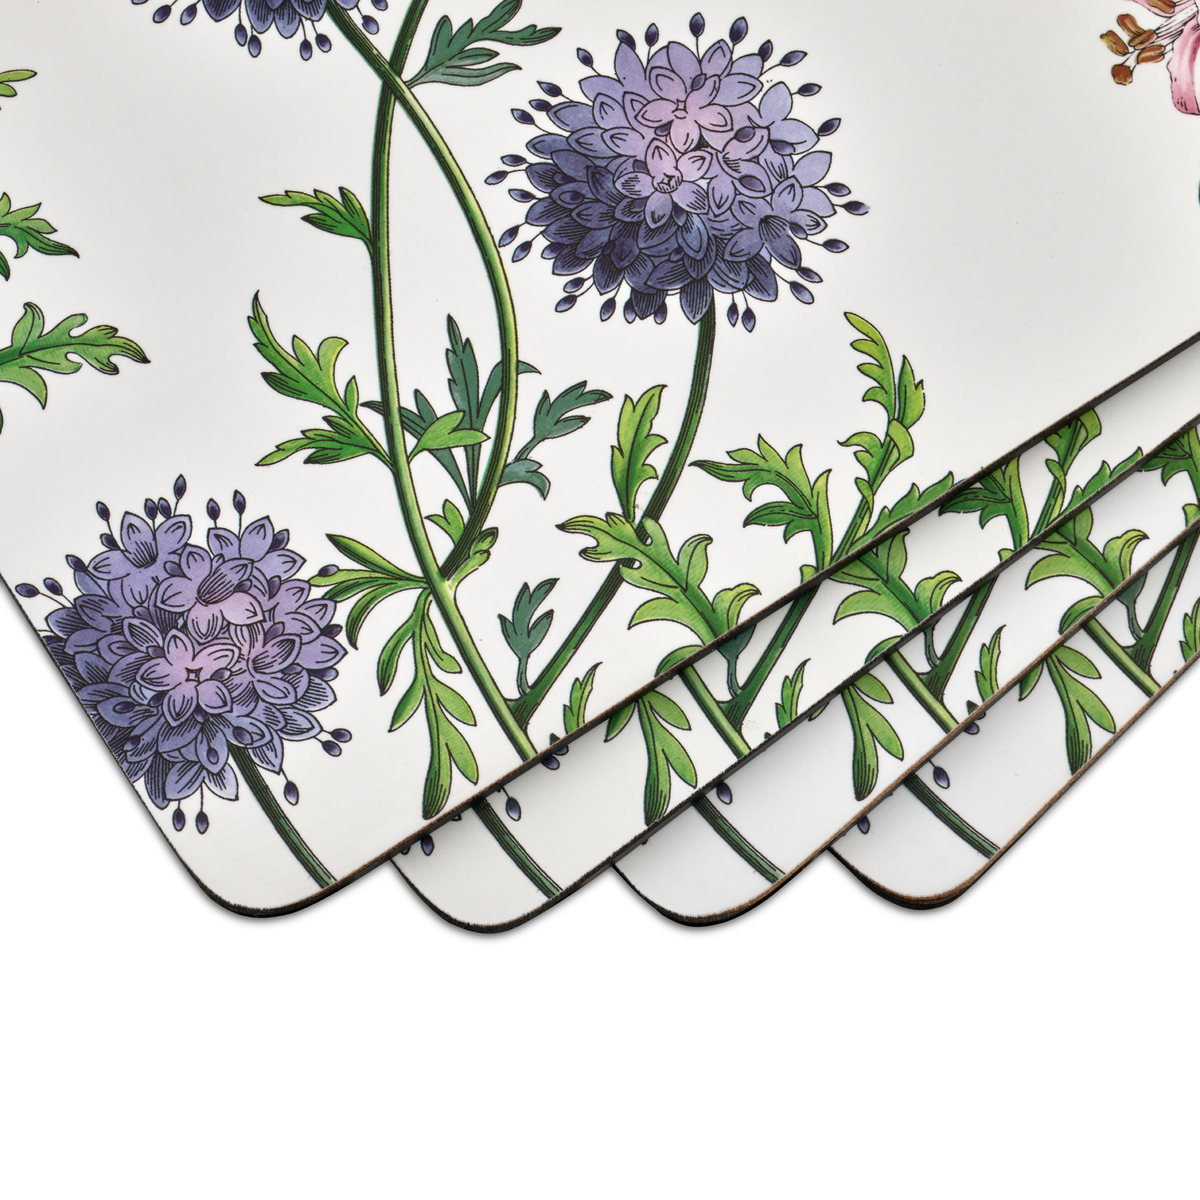 Stafford Blooms Large Placemats set of 4 image number null